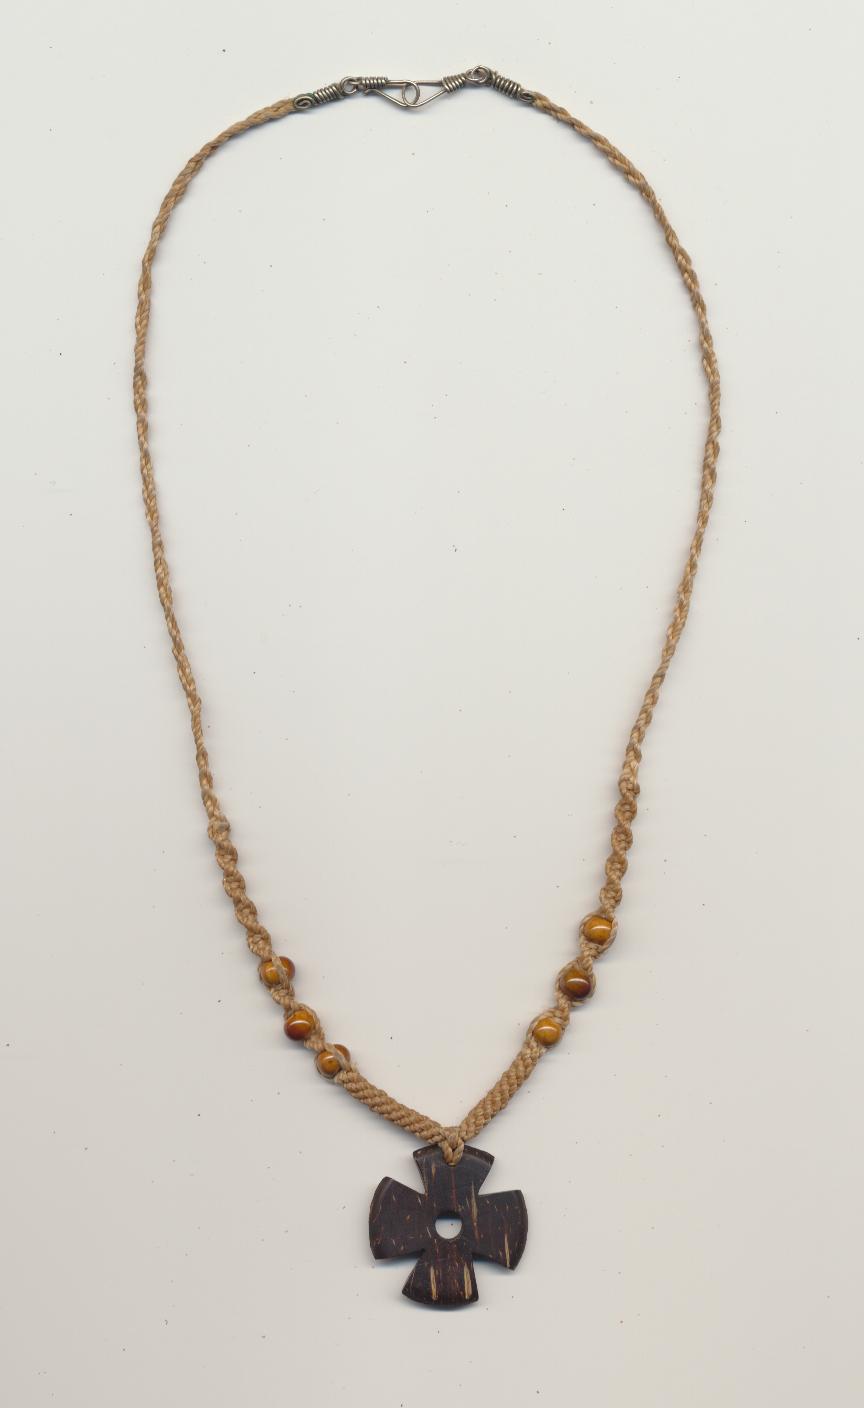 Necklace for boys made of macrame with wooden beads and coconut wood pendant, length necklace 17.5'' 44cm., pendant 1'' 2.5cm.